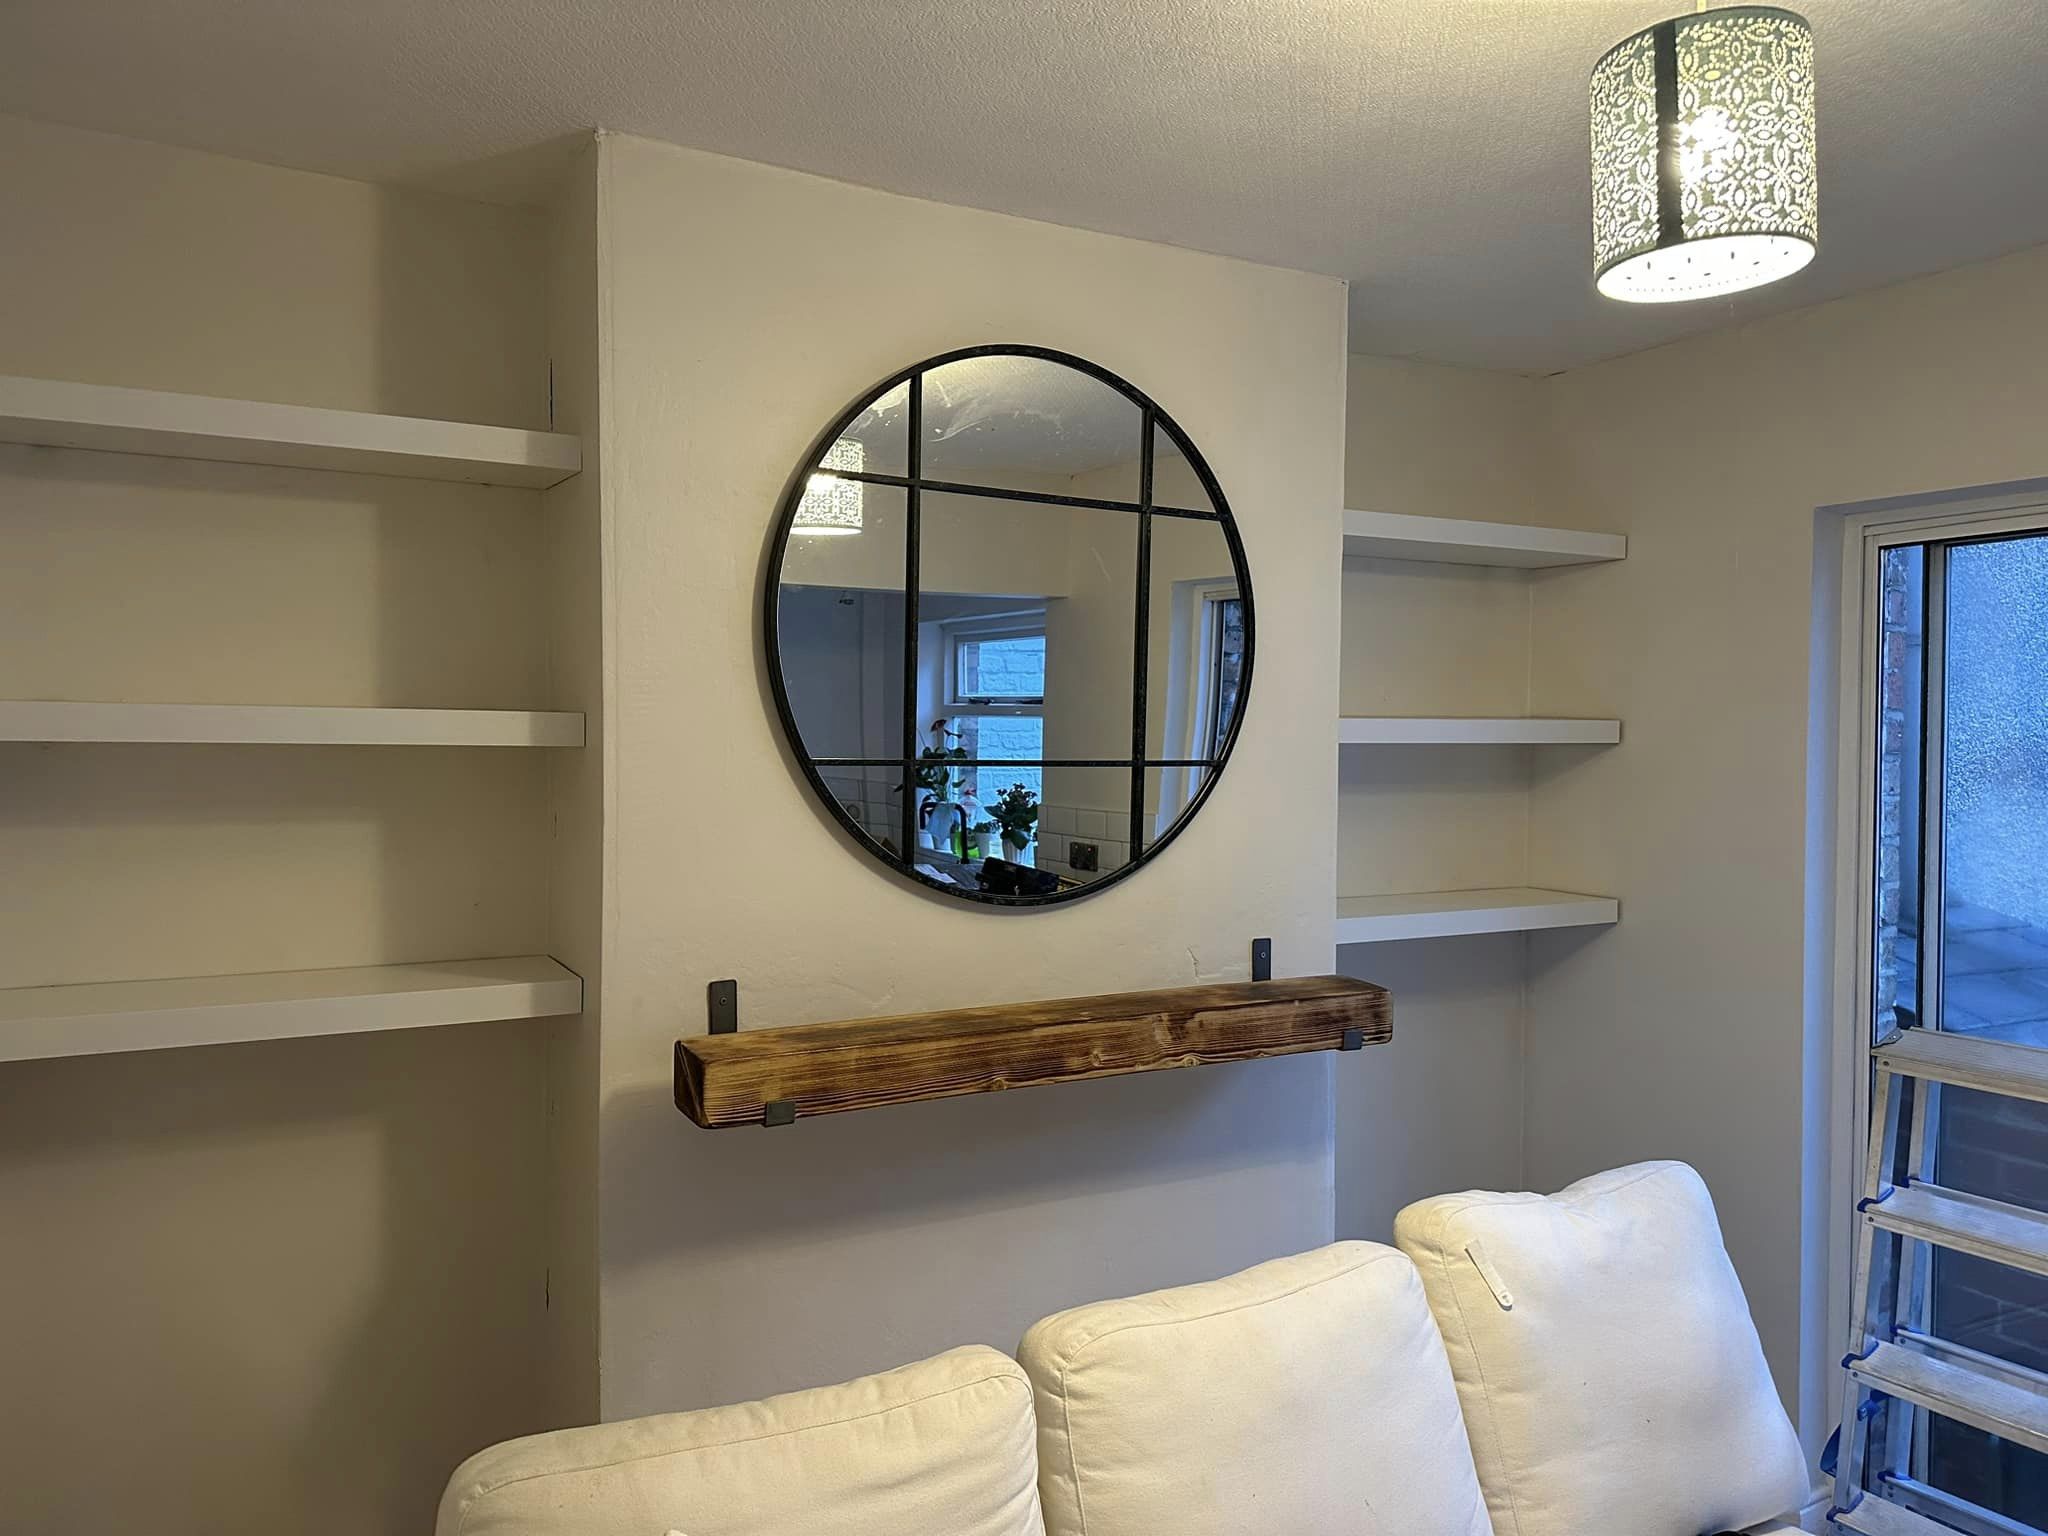 Circle mirror in living room with fitted shelving